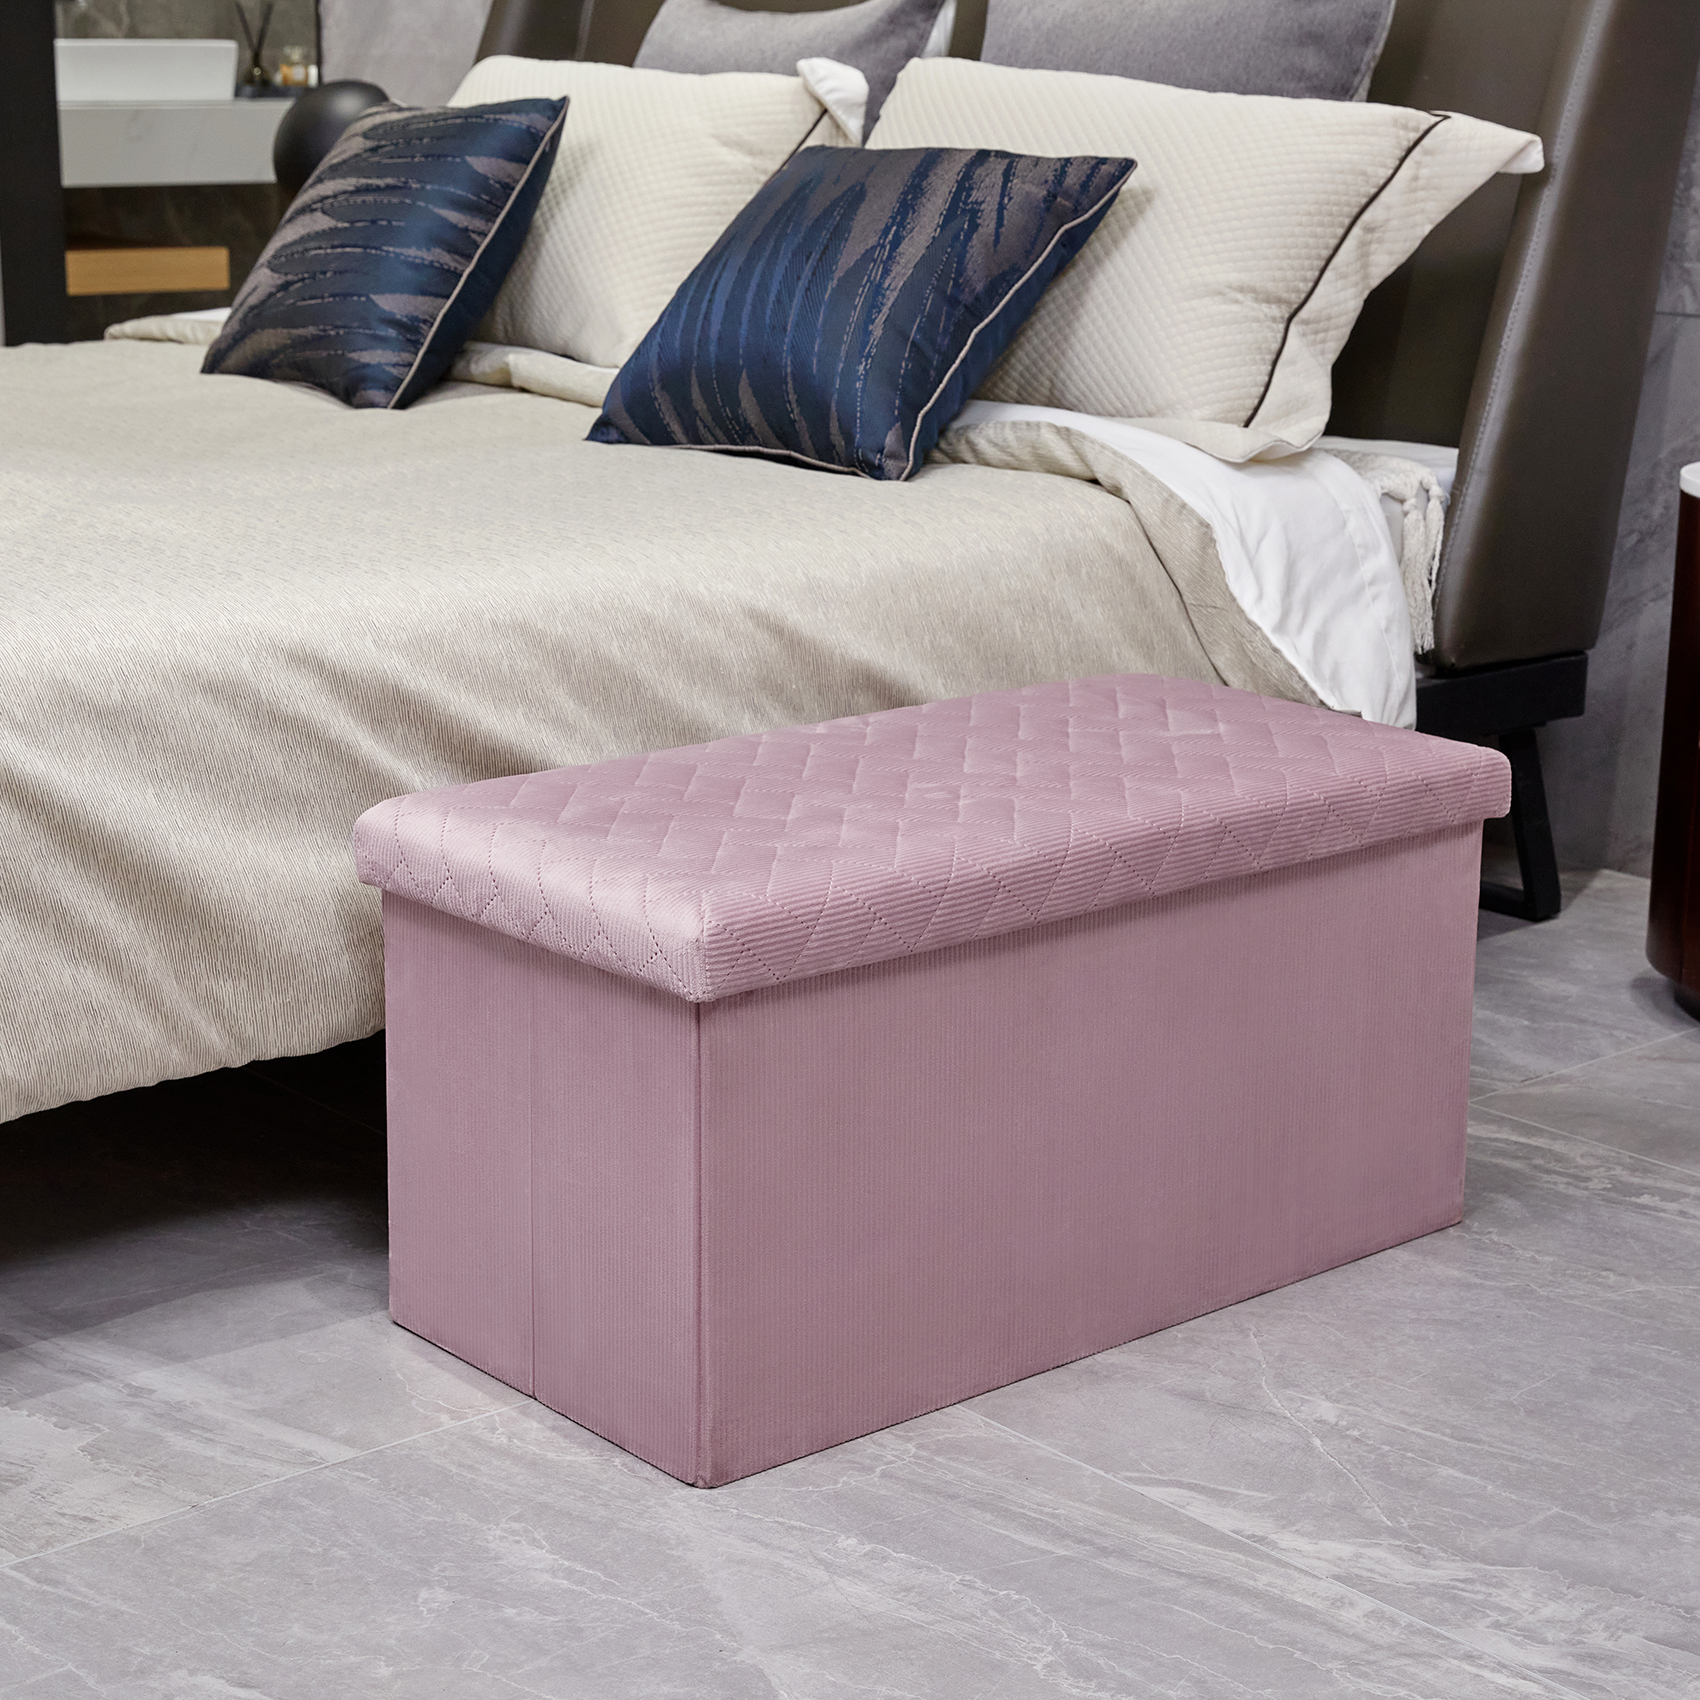 PINPLUS 30.1" Folding Pink Velvet  Storage Ottoman Bench with Lid for Living Room, Long Shoes Bench, Toys Chest Box, Foot Rest Stool Seat - image 5 of 7